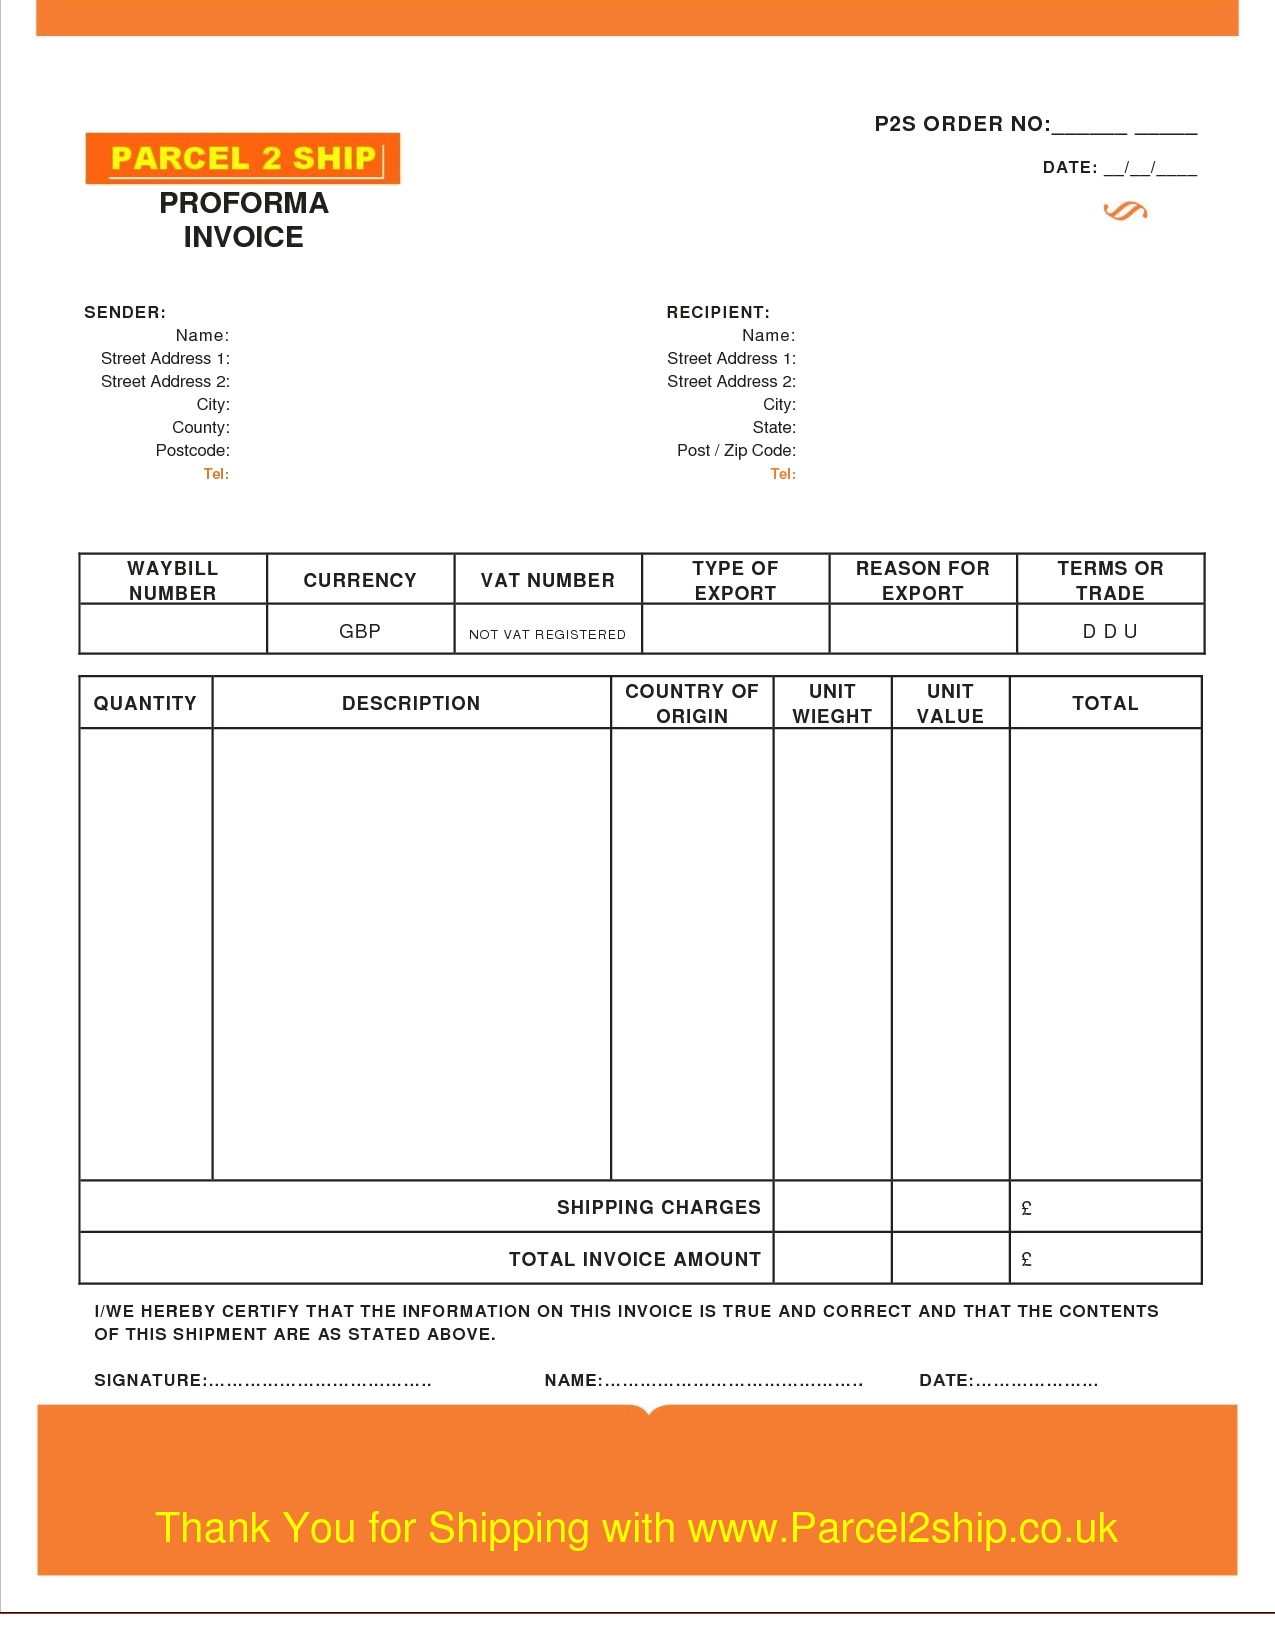 free business invoice template